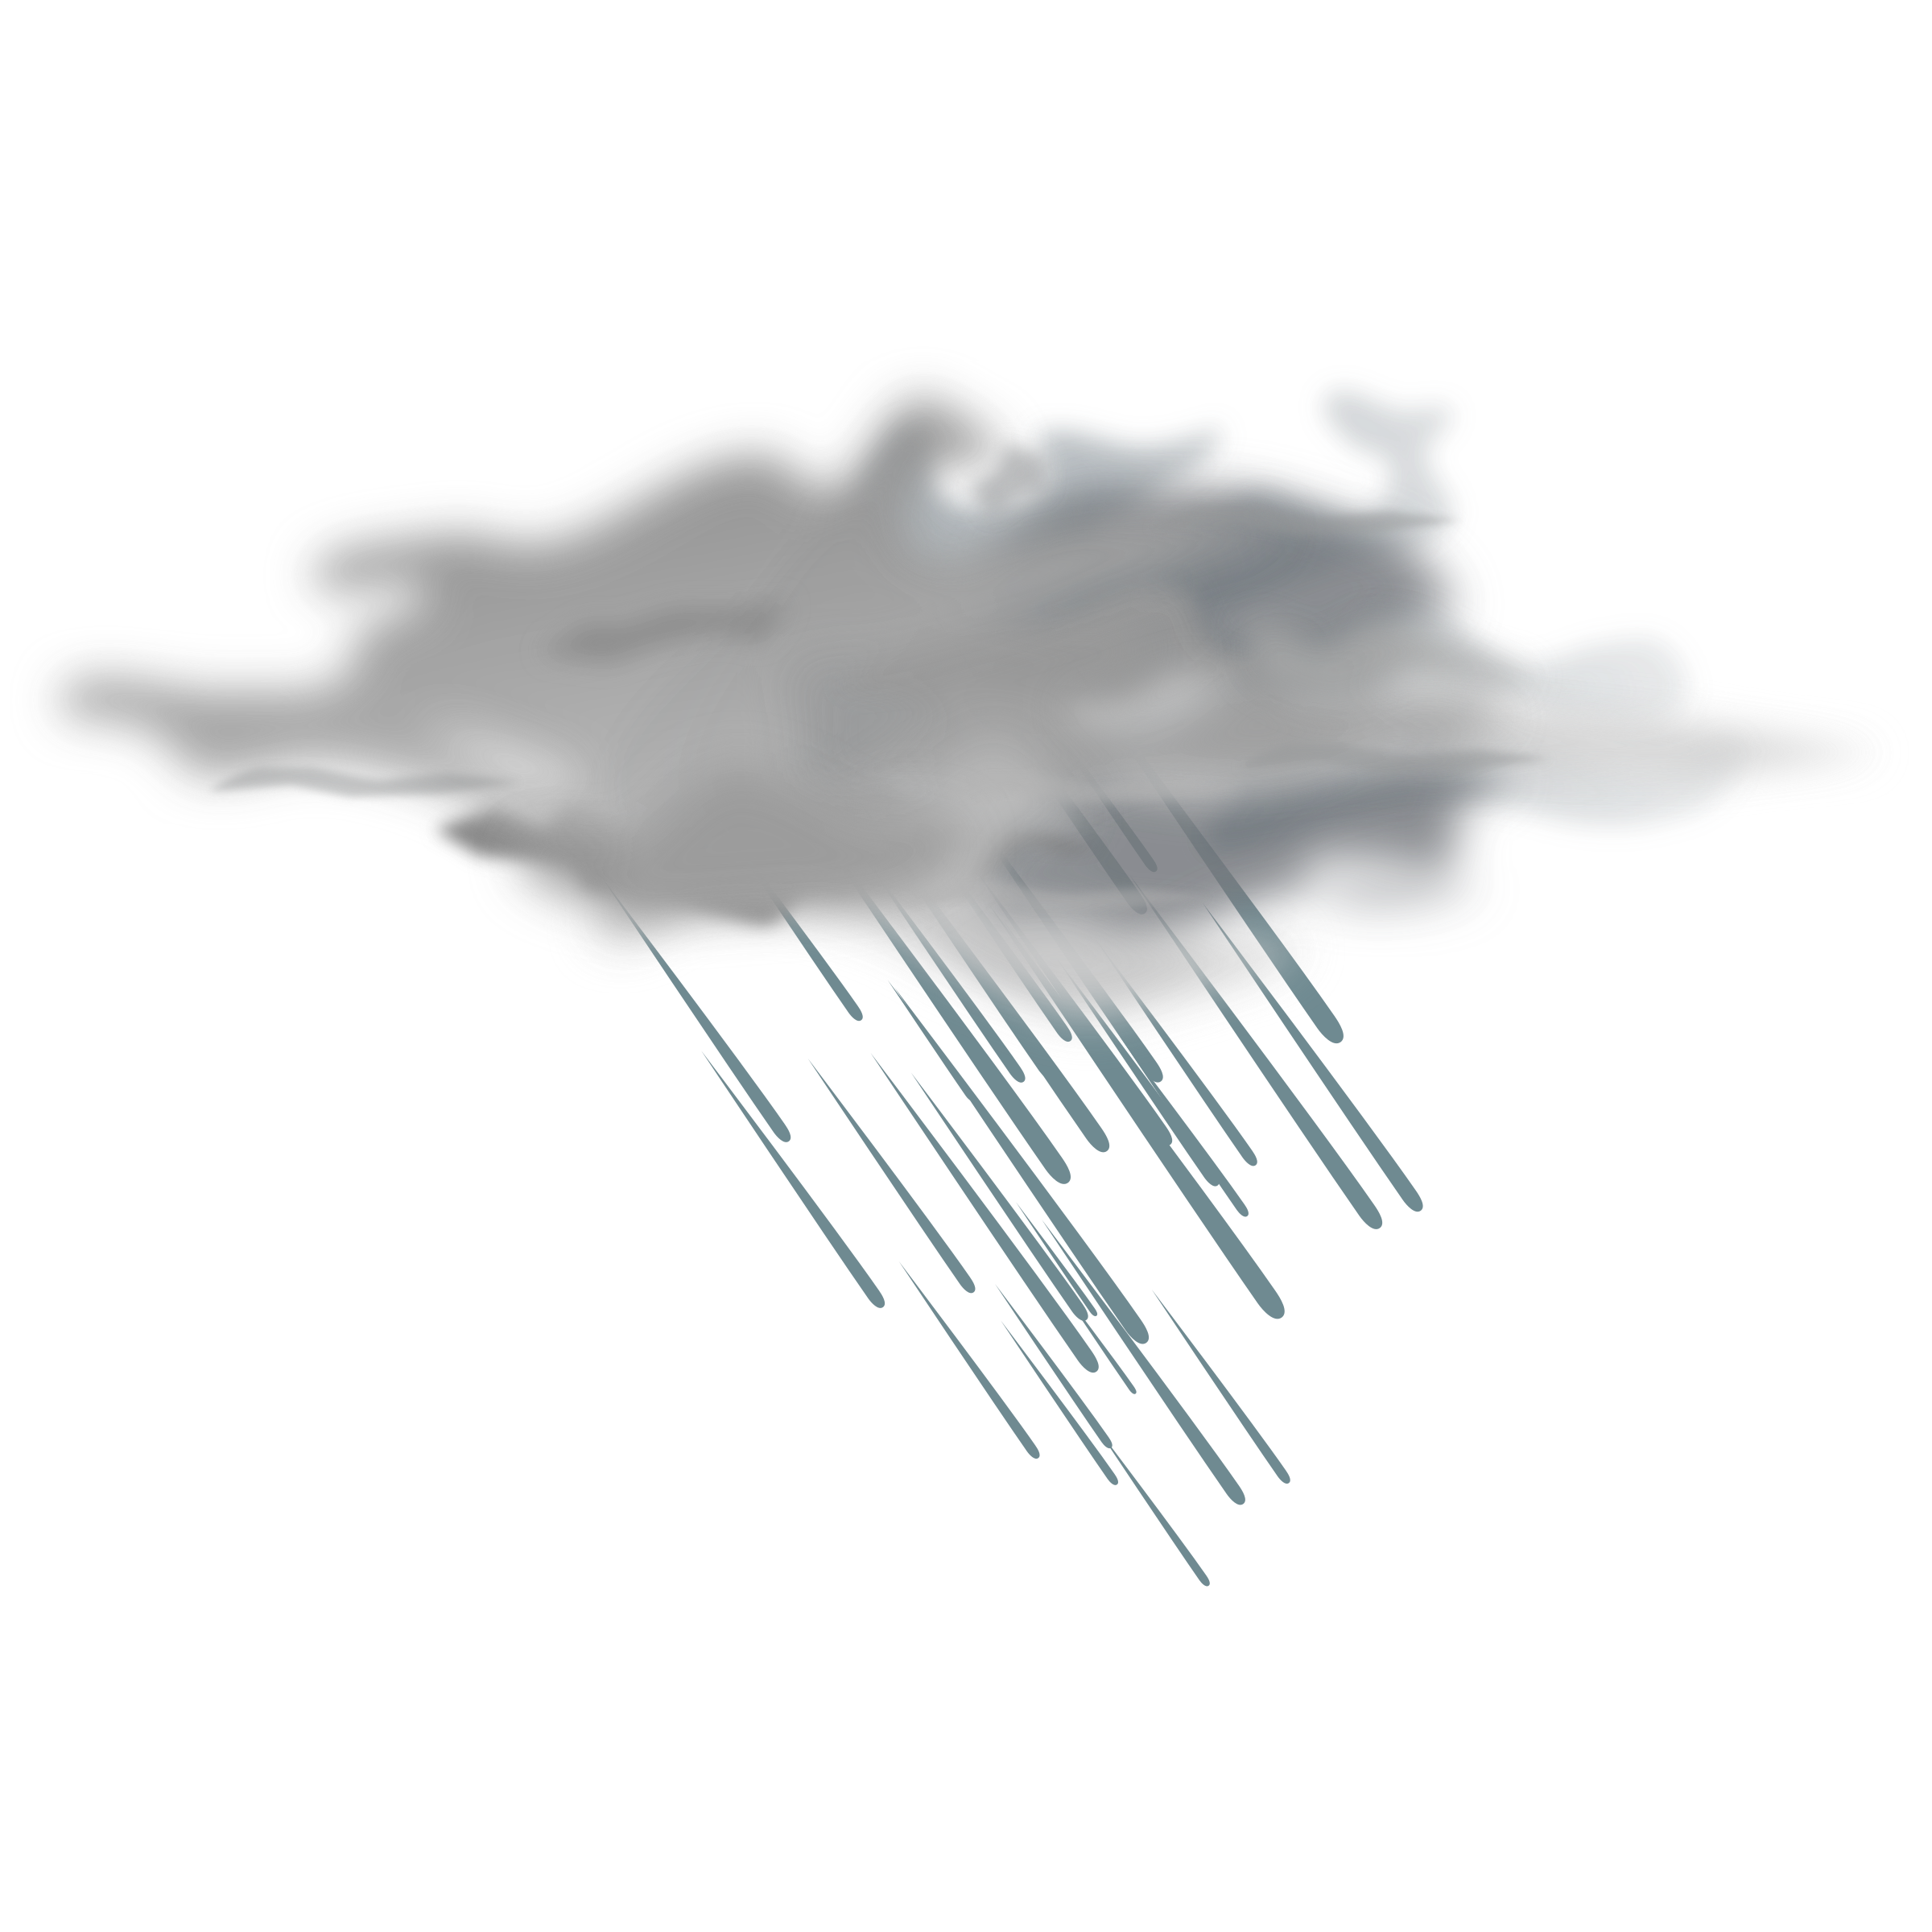 raindrop clipart cloudy with